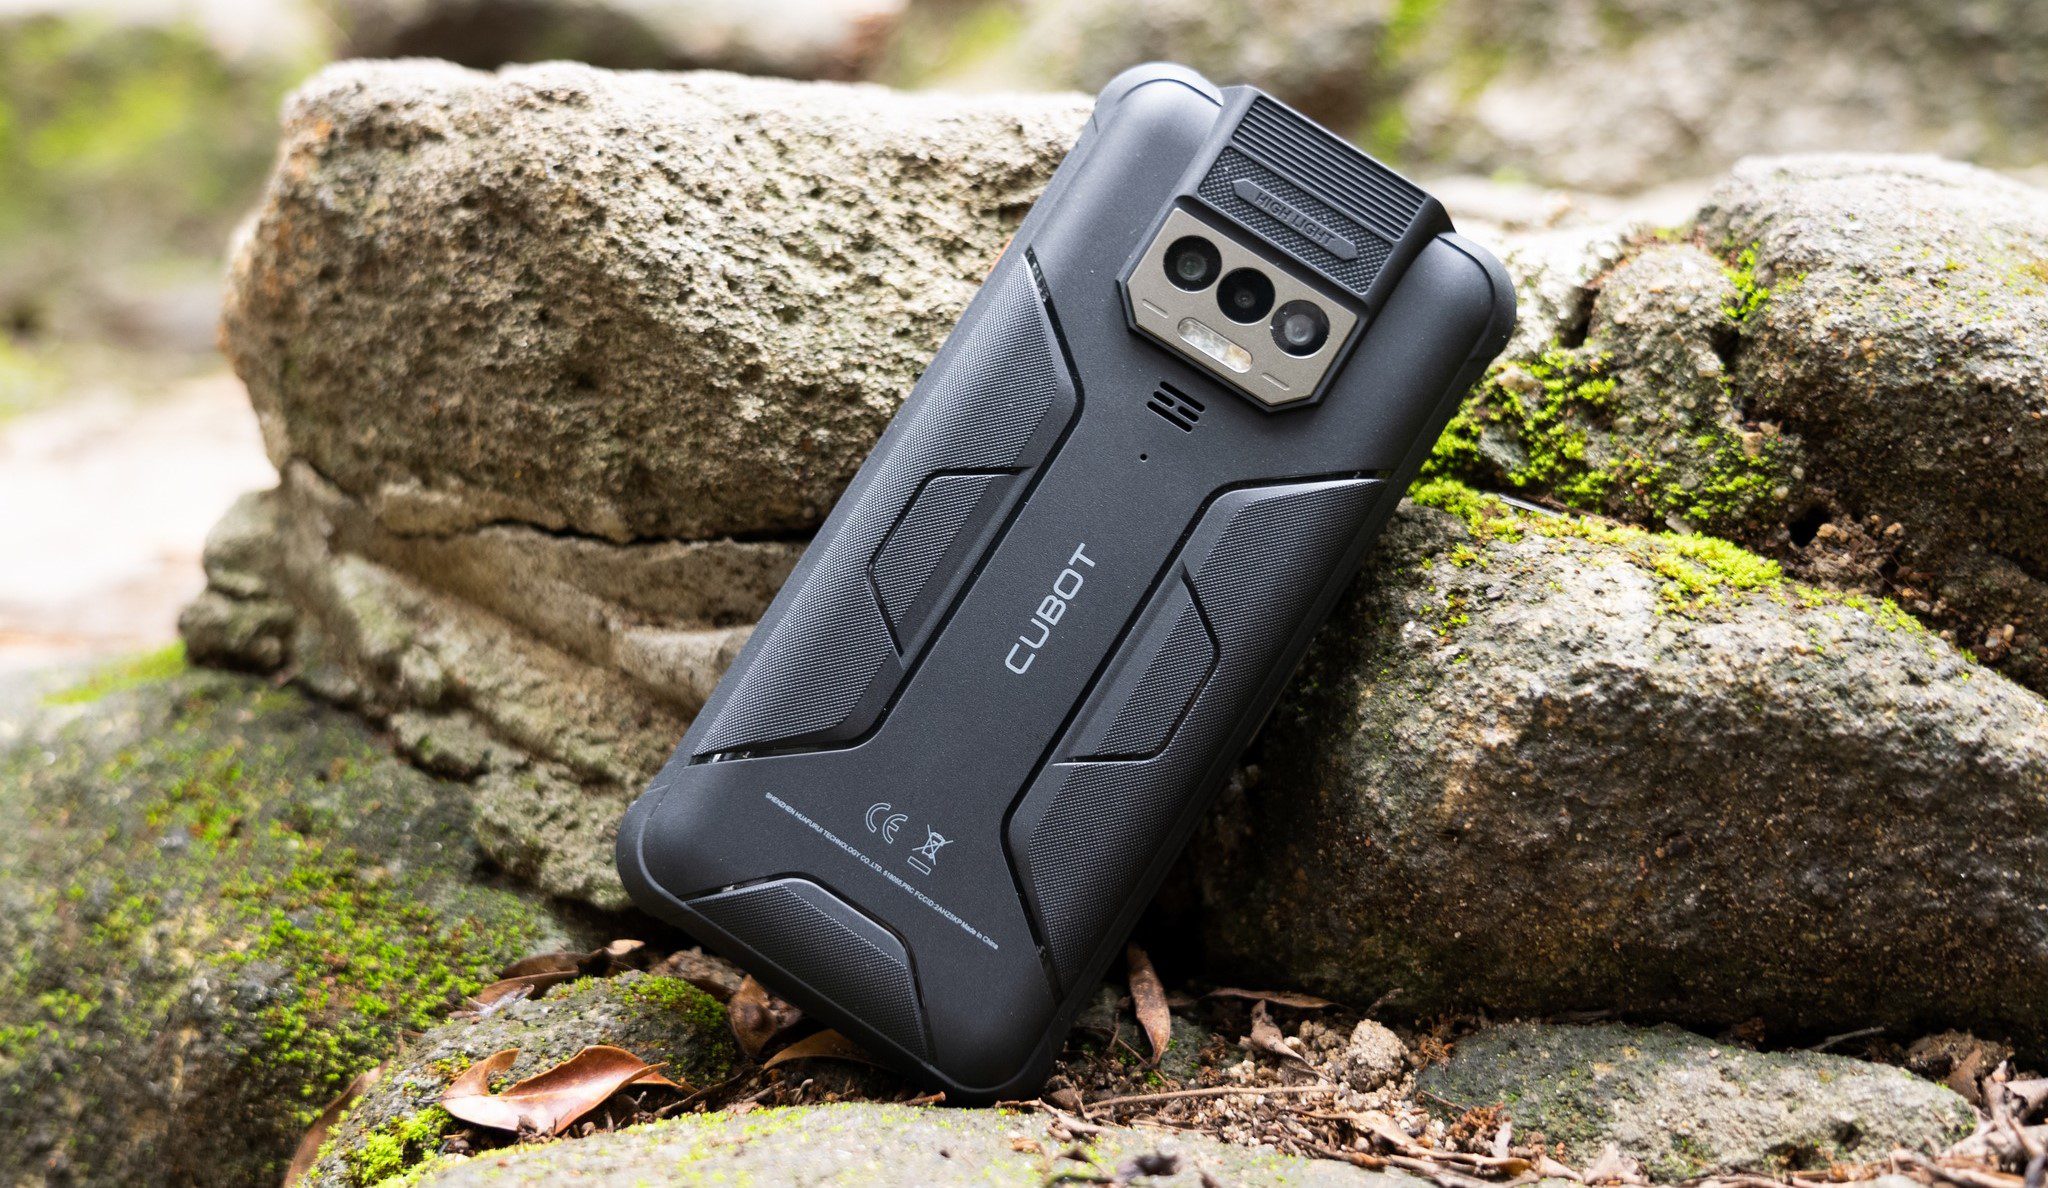 Cubot King Kong 3 rugged smartphone review